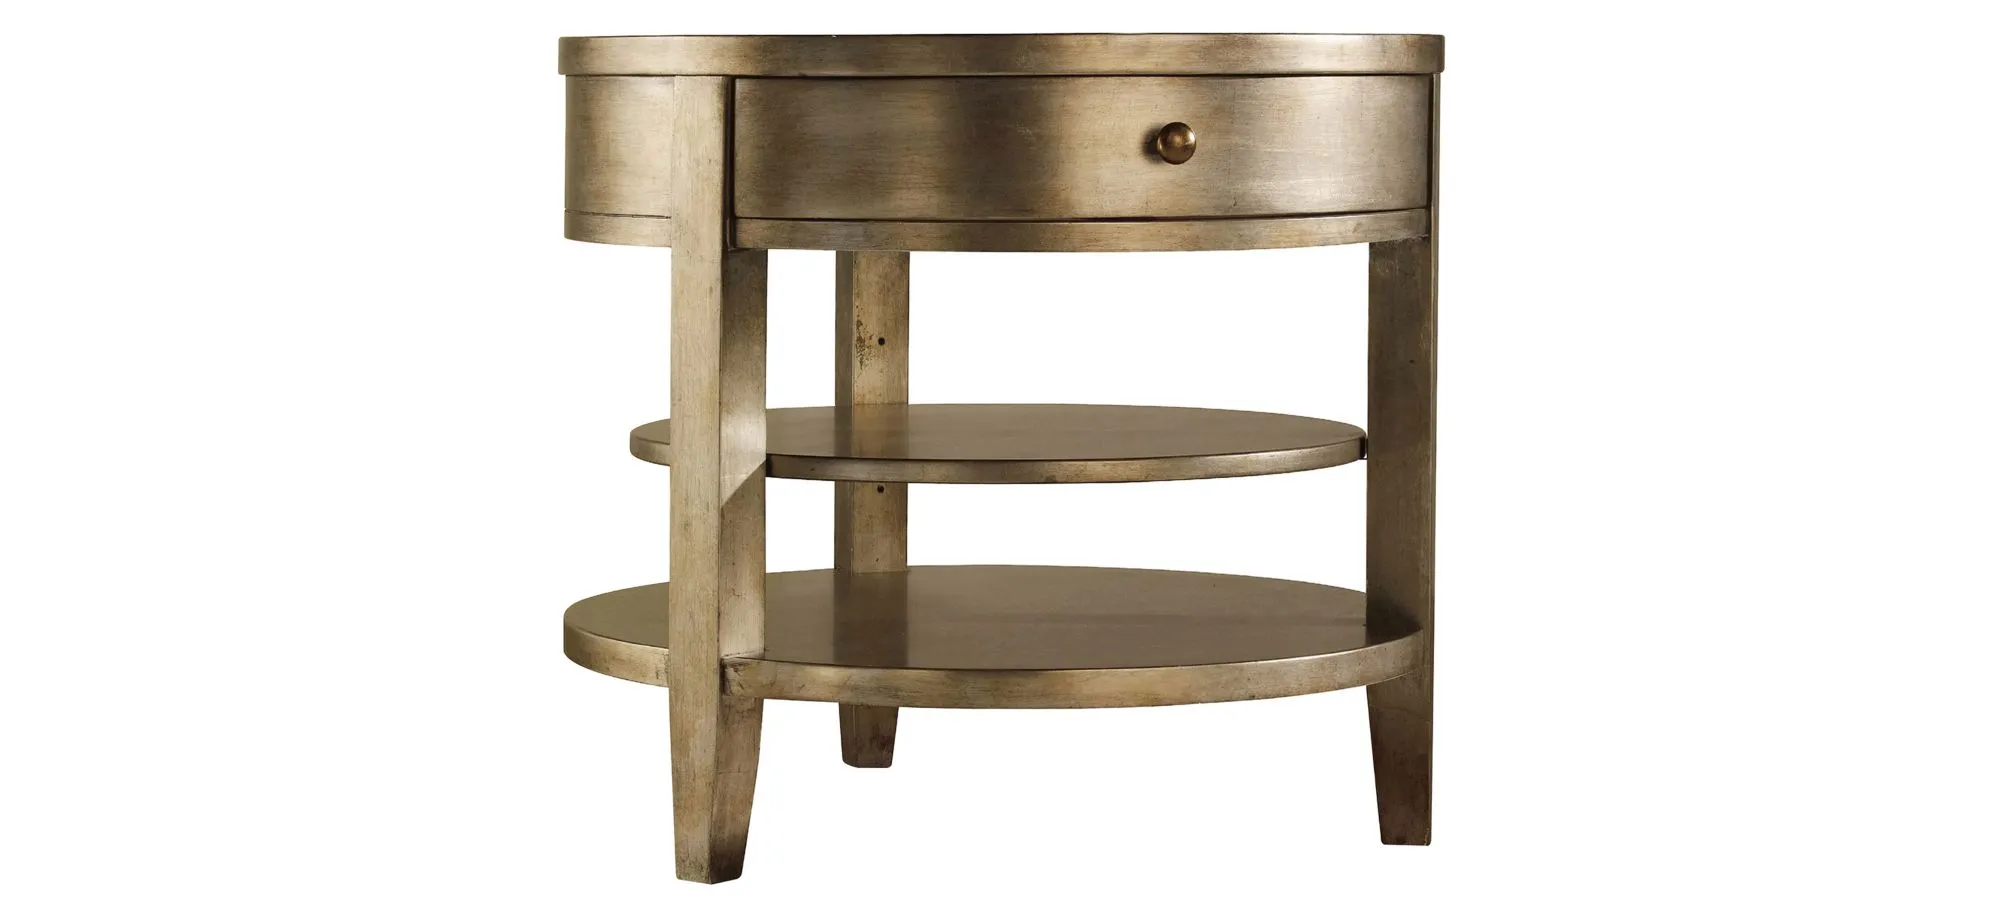 Sanctuary Round Accent Table in Visage by Hooker Furniture